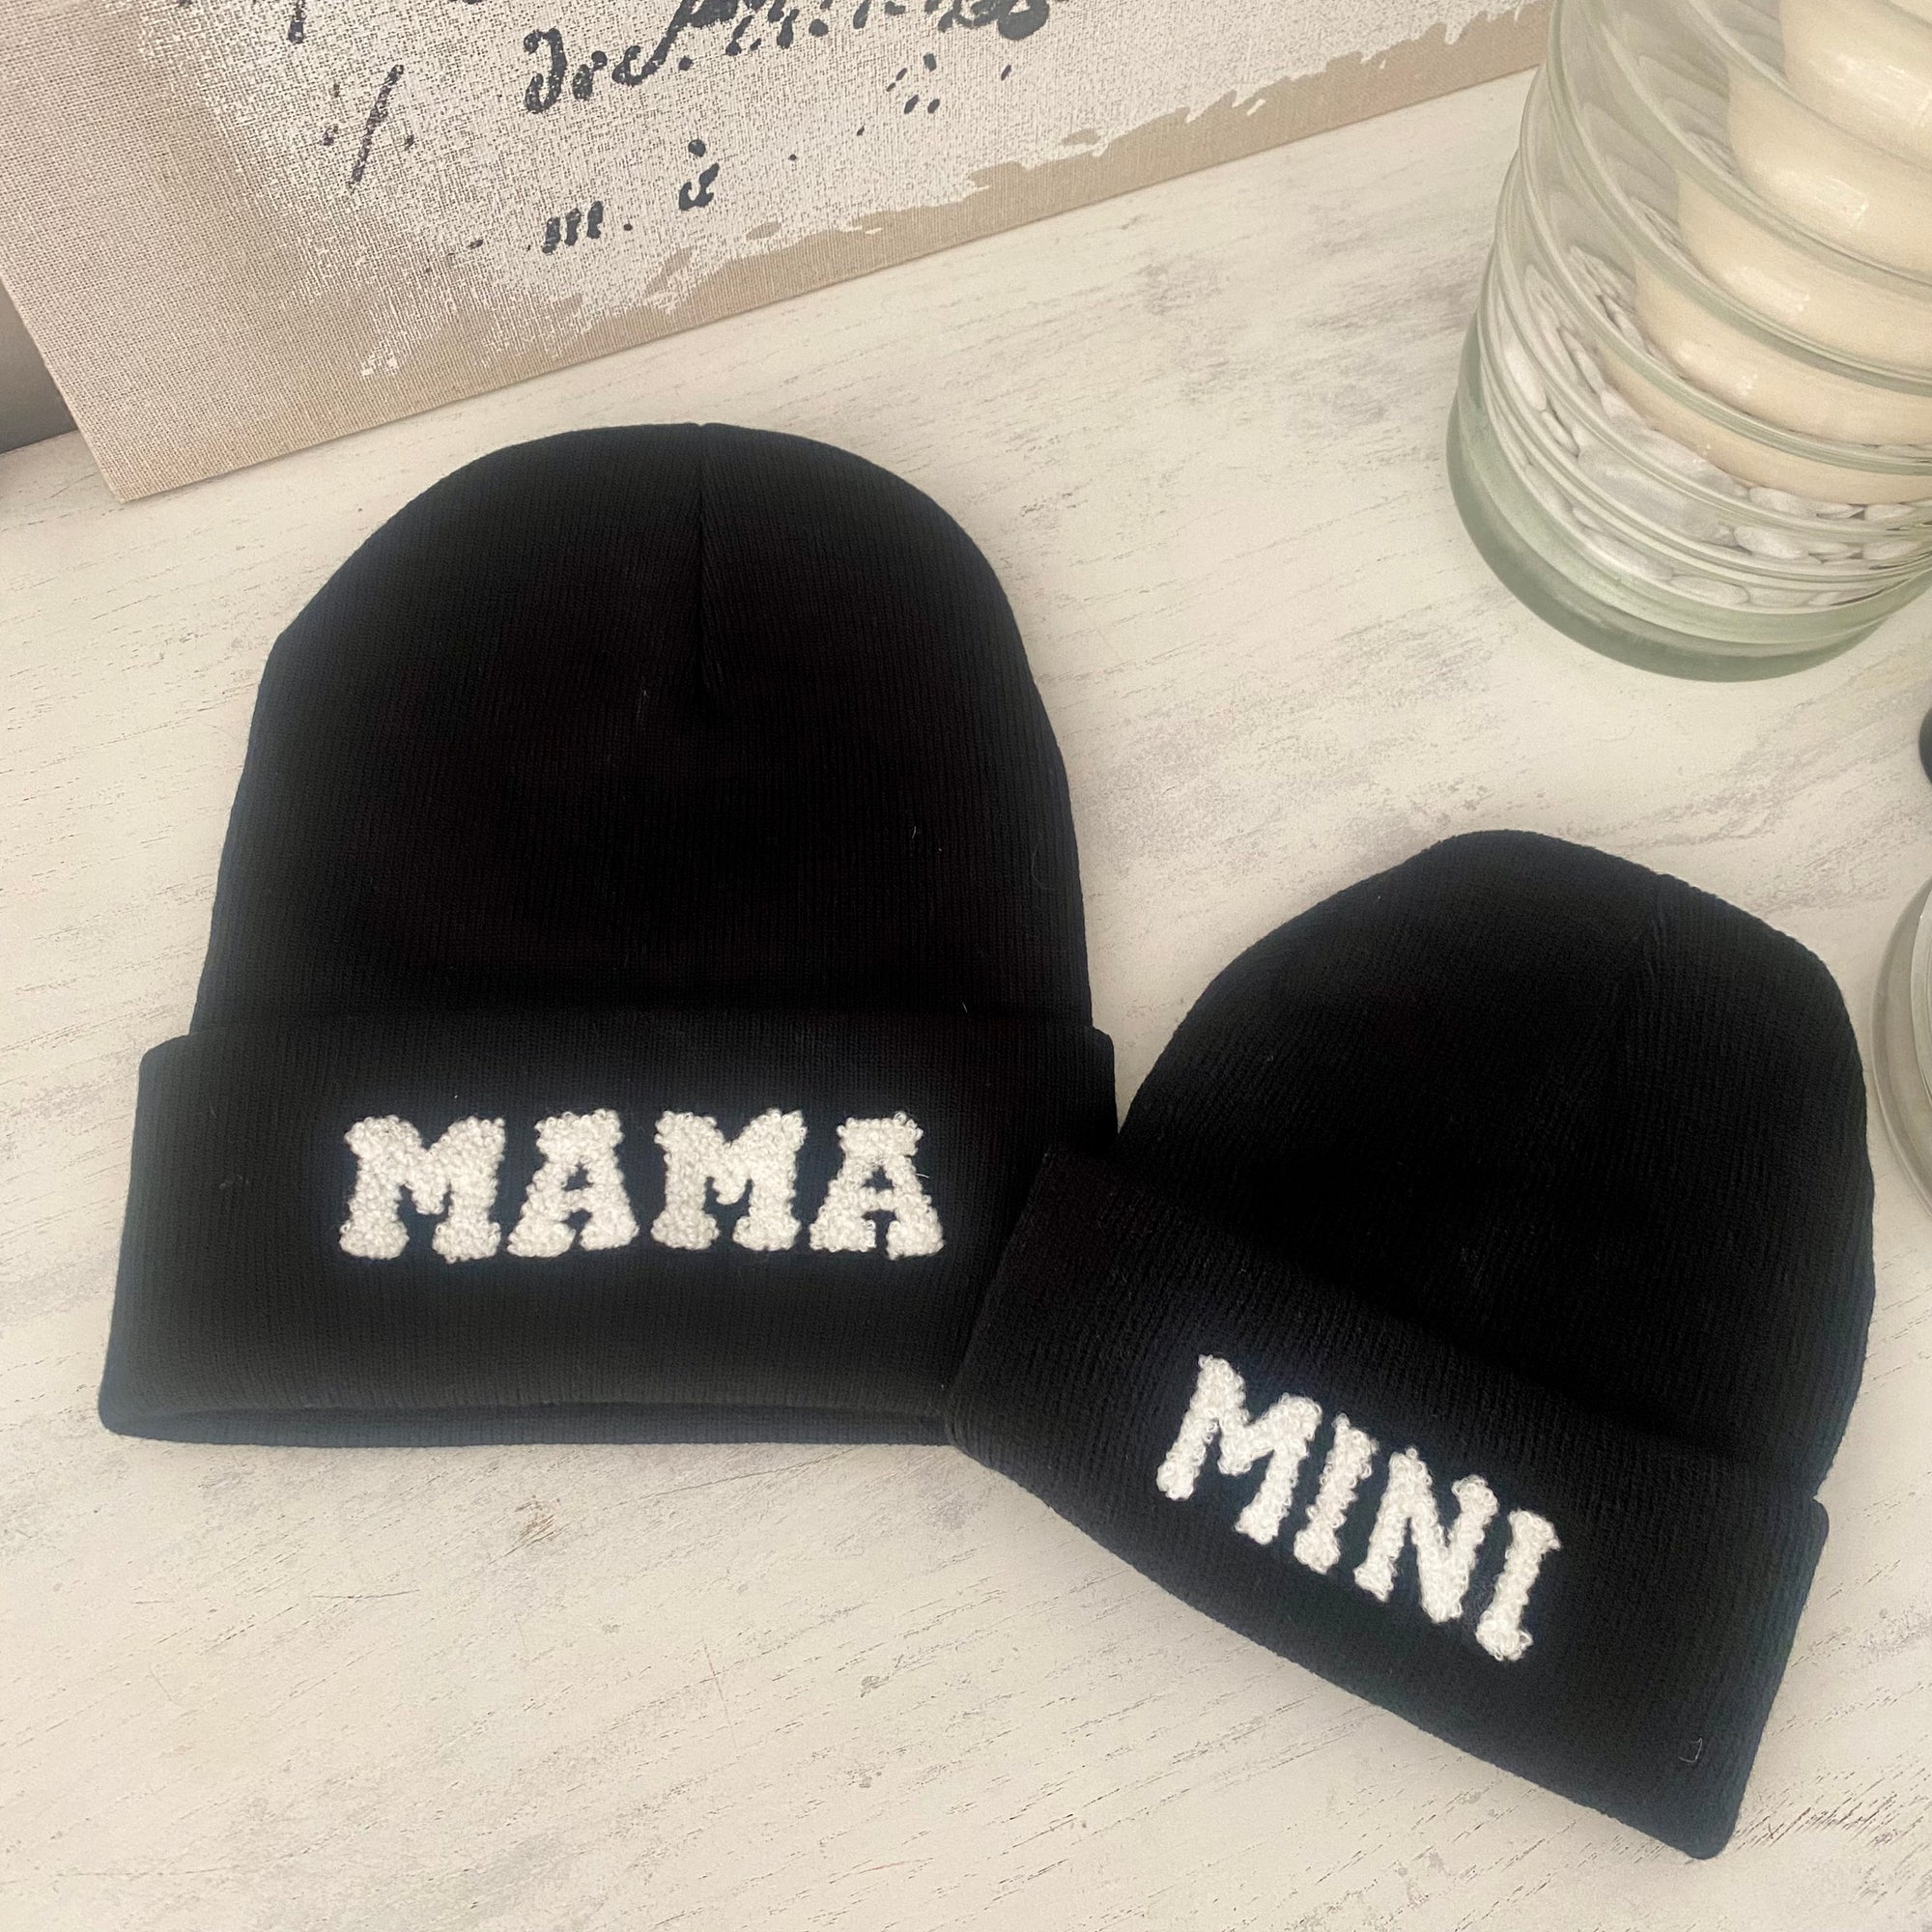 „Mama“ Beanie find Stylish Fashion for Little People- at Little Foxx Concept Store